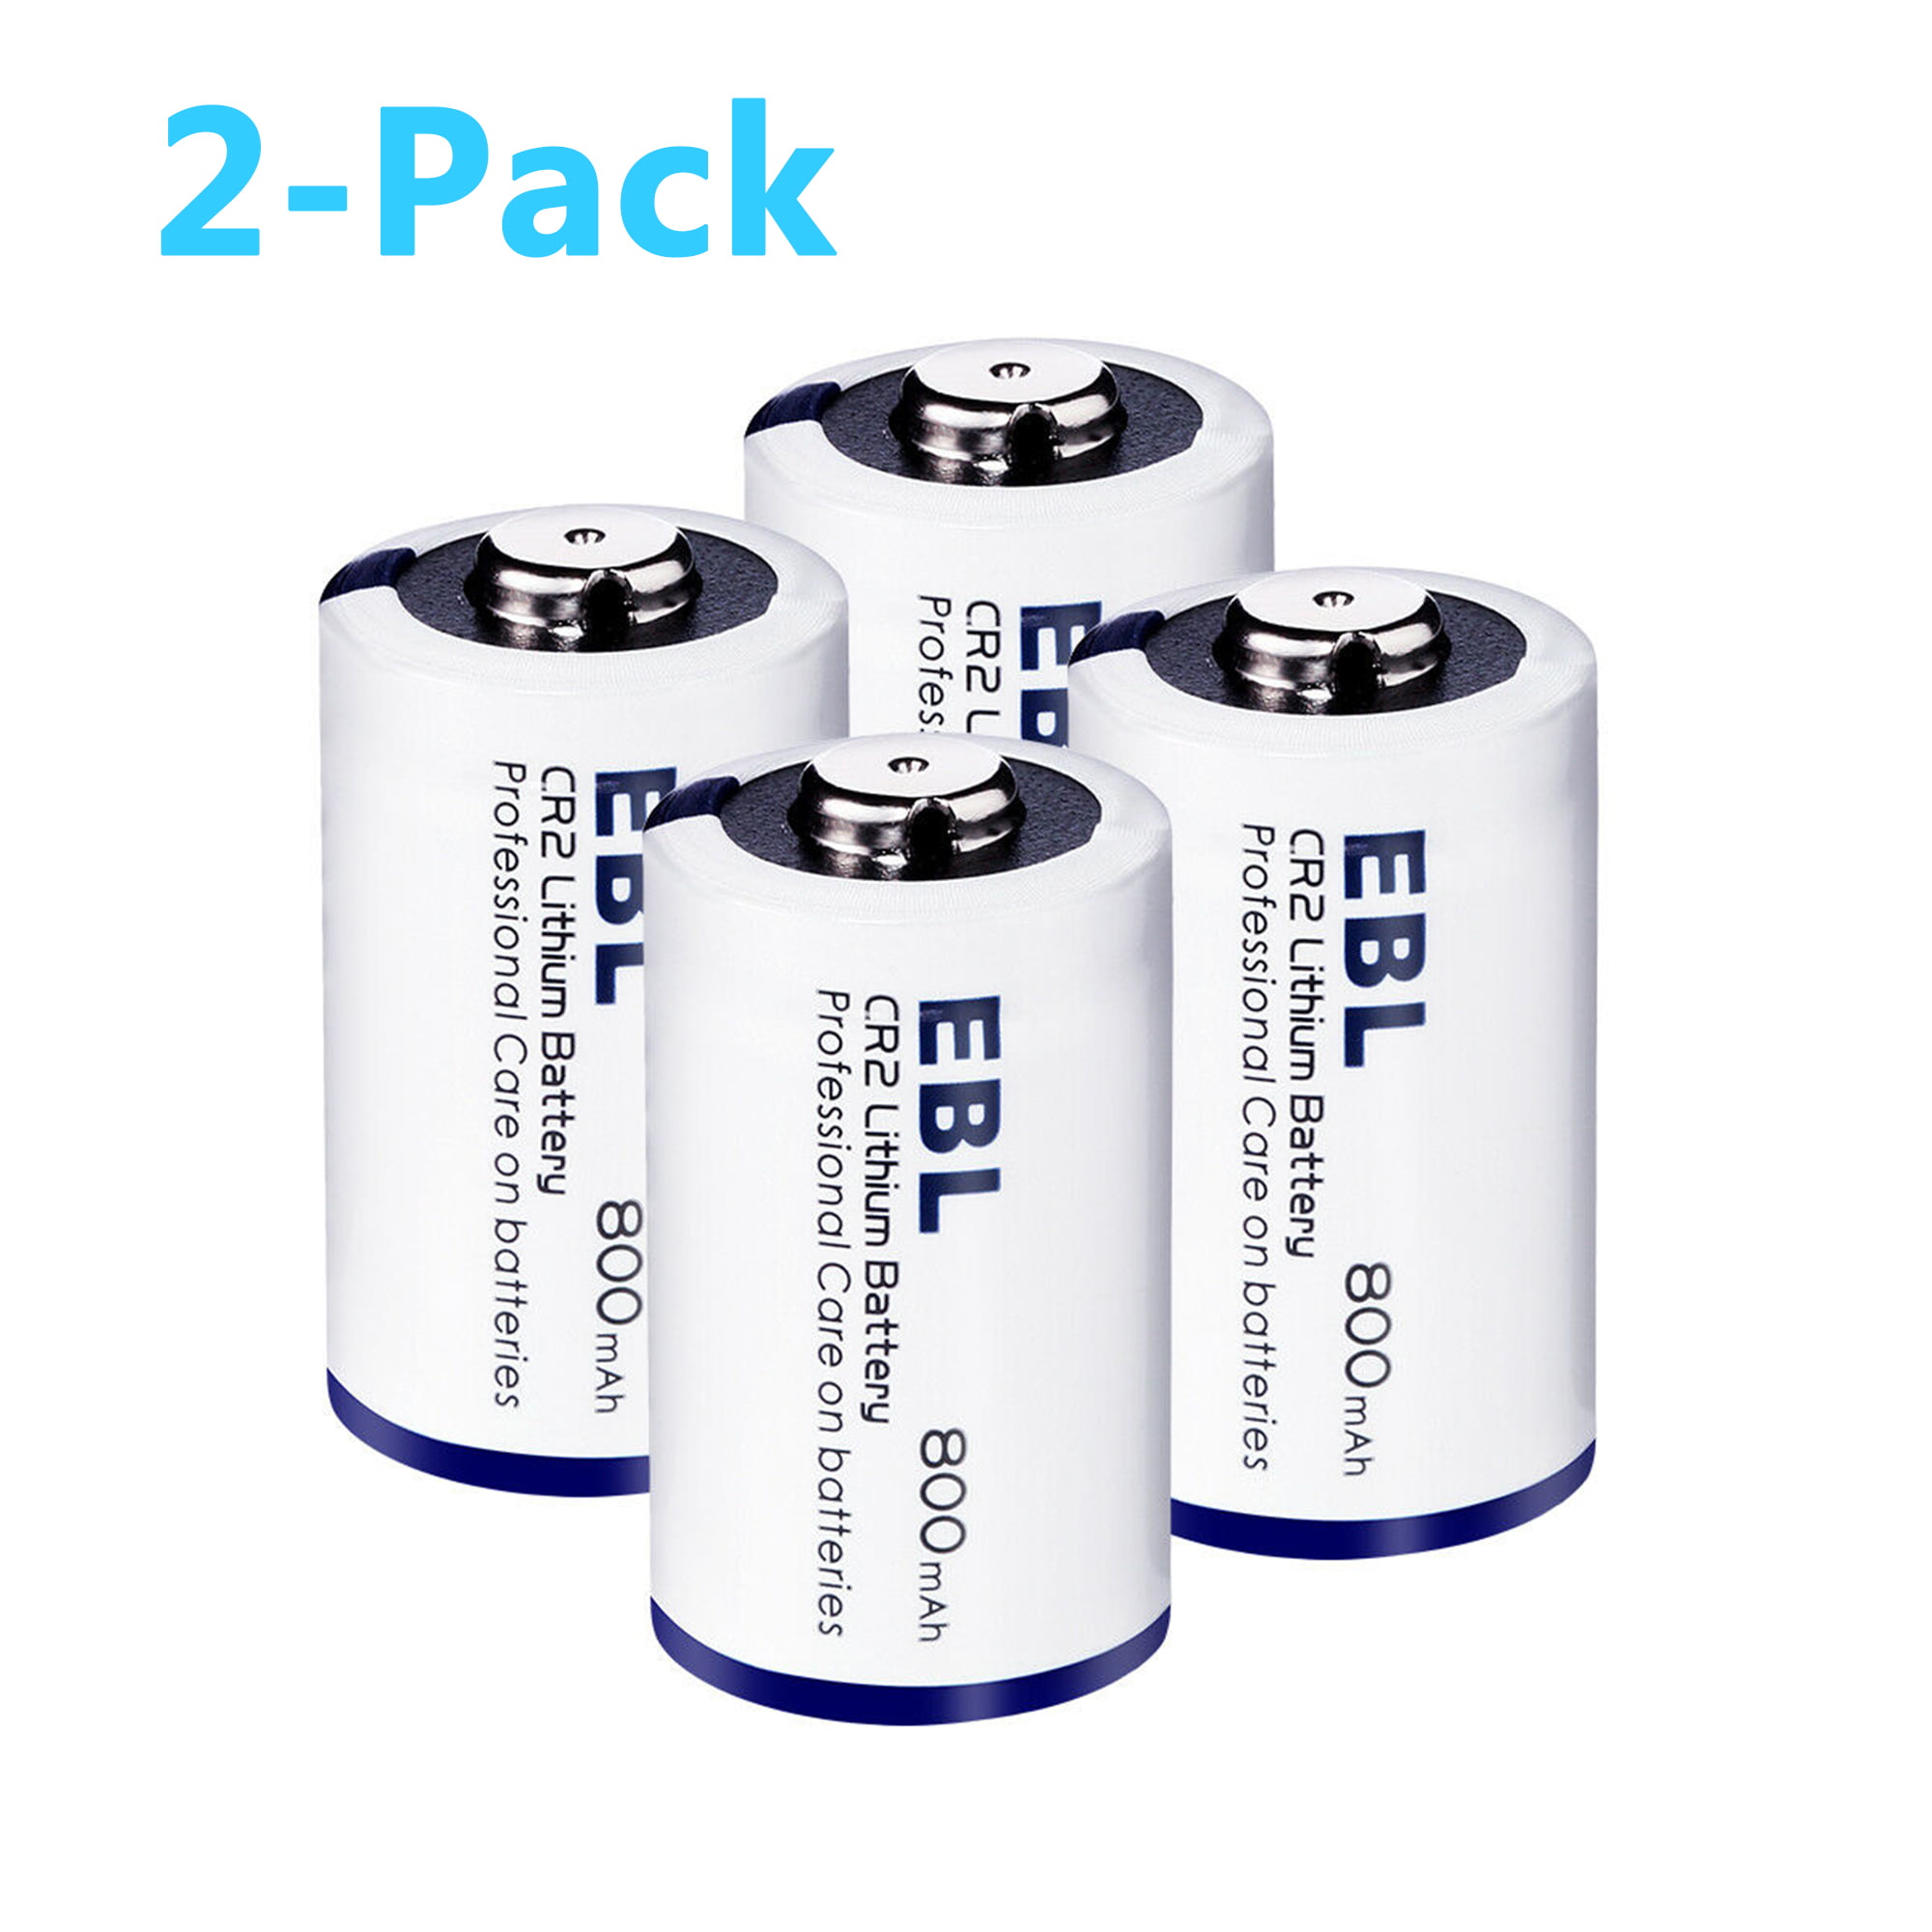 Details about   Tenergy PREMIUM PRO AA AAA 2800mAh,1100mAh NiMH Rechargeable Batteries 1.2V Lot 